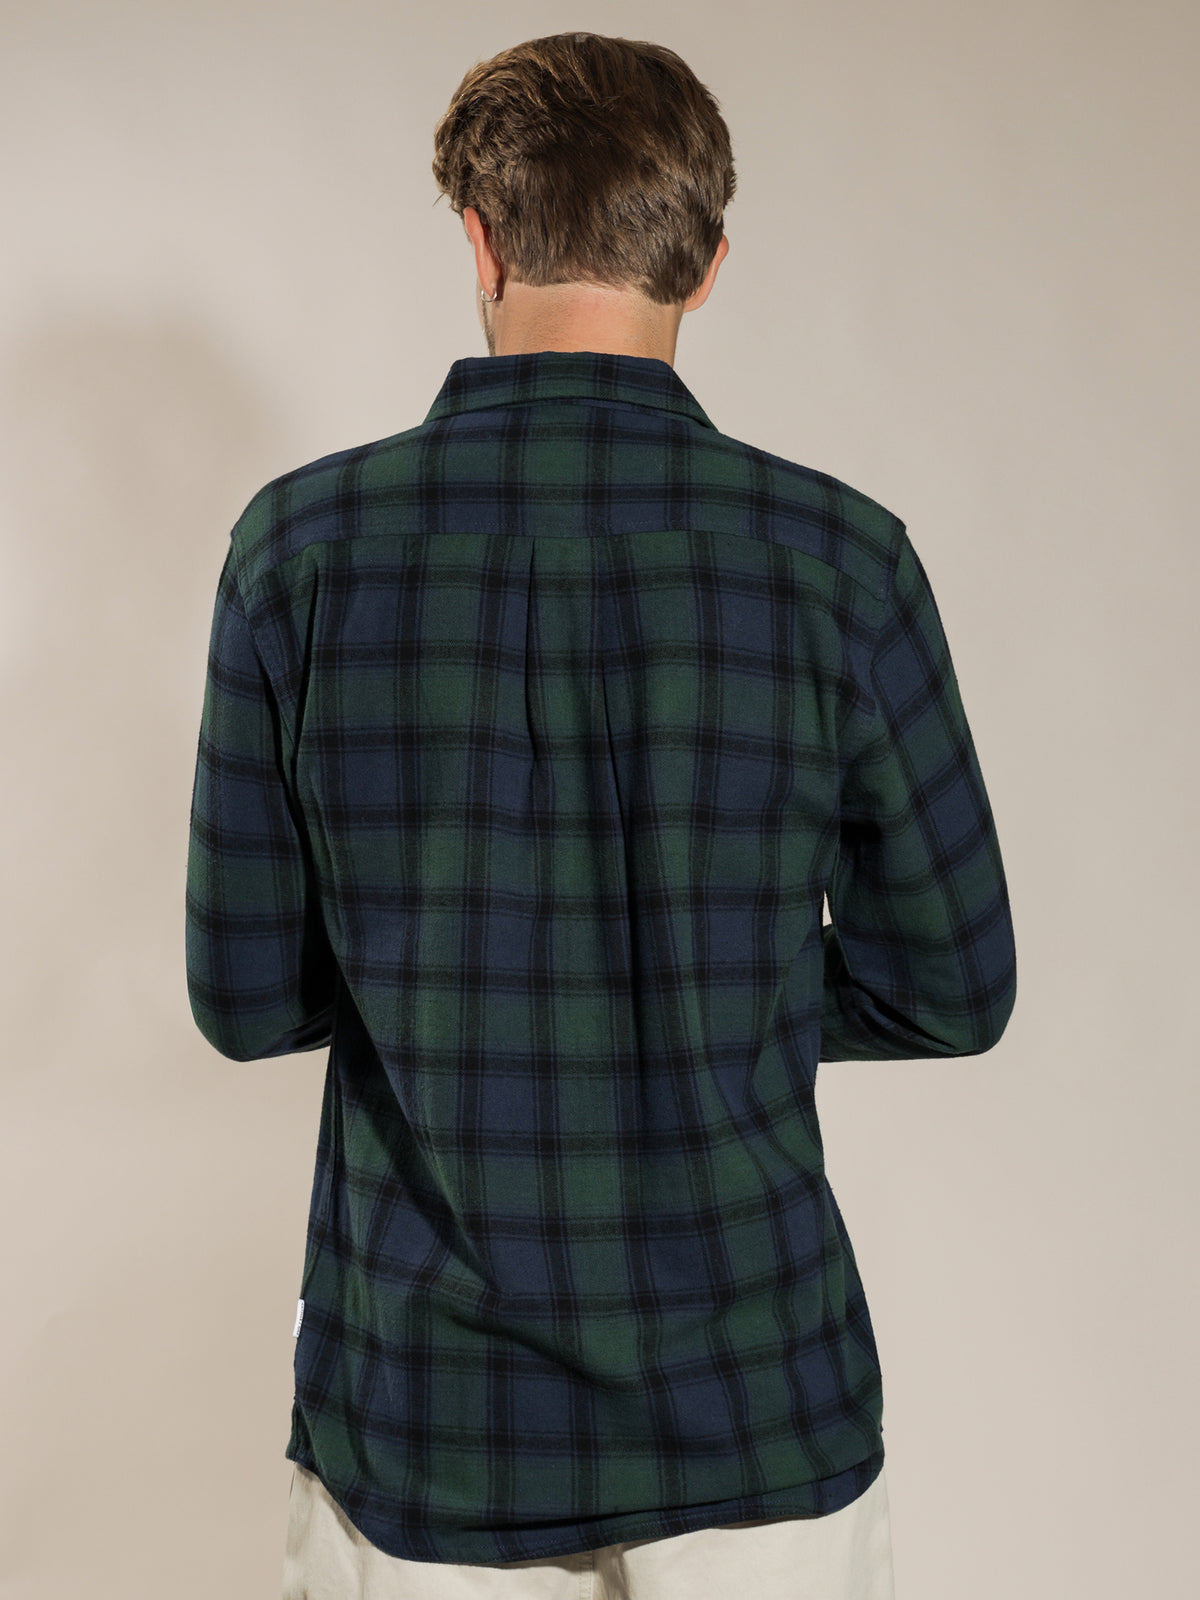 Cyrus Plaid Long Sleeve Shirt in Forest Plaid